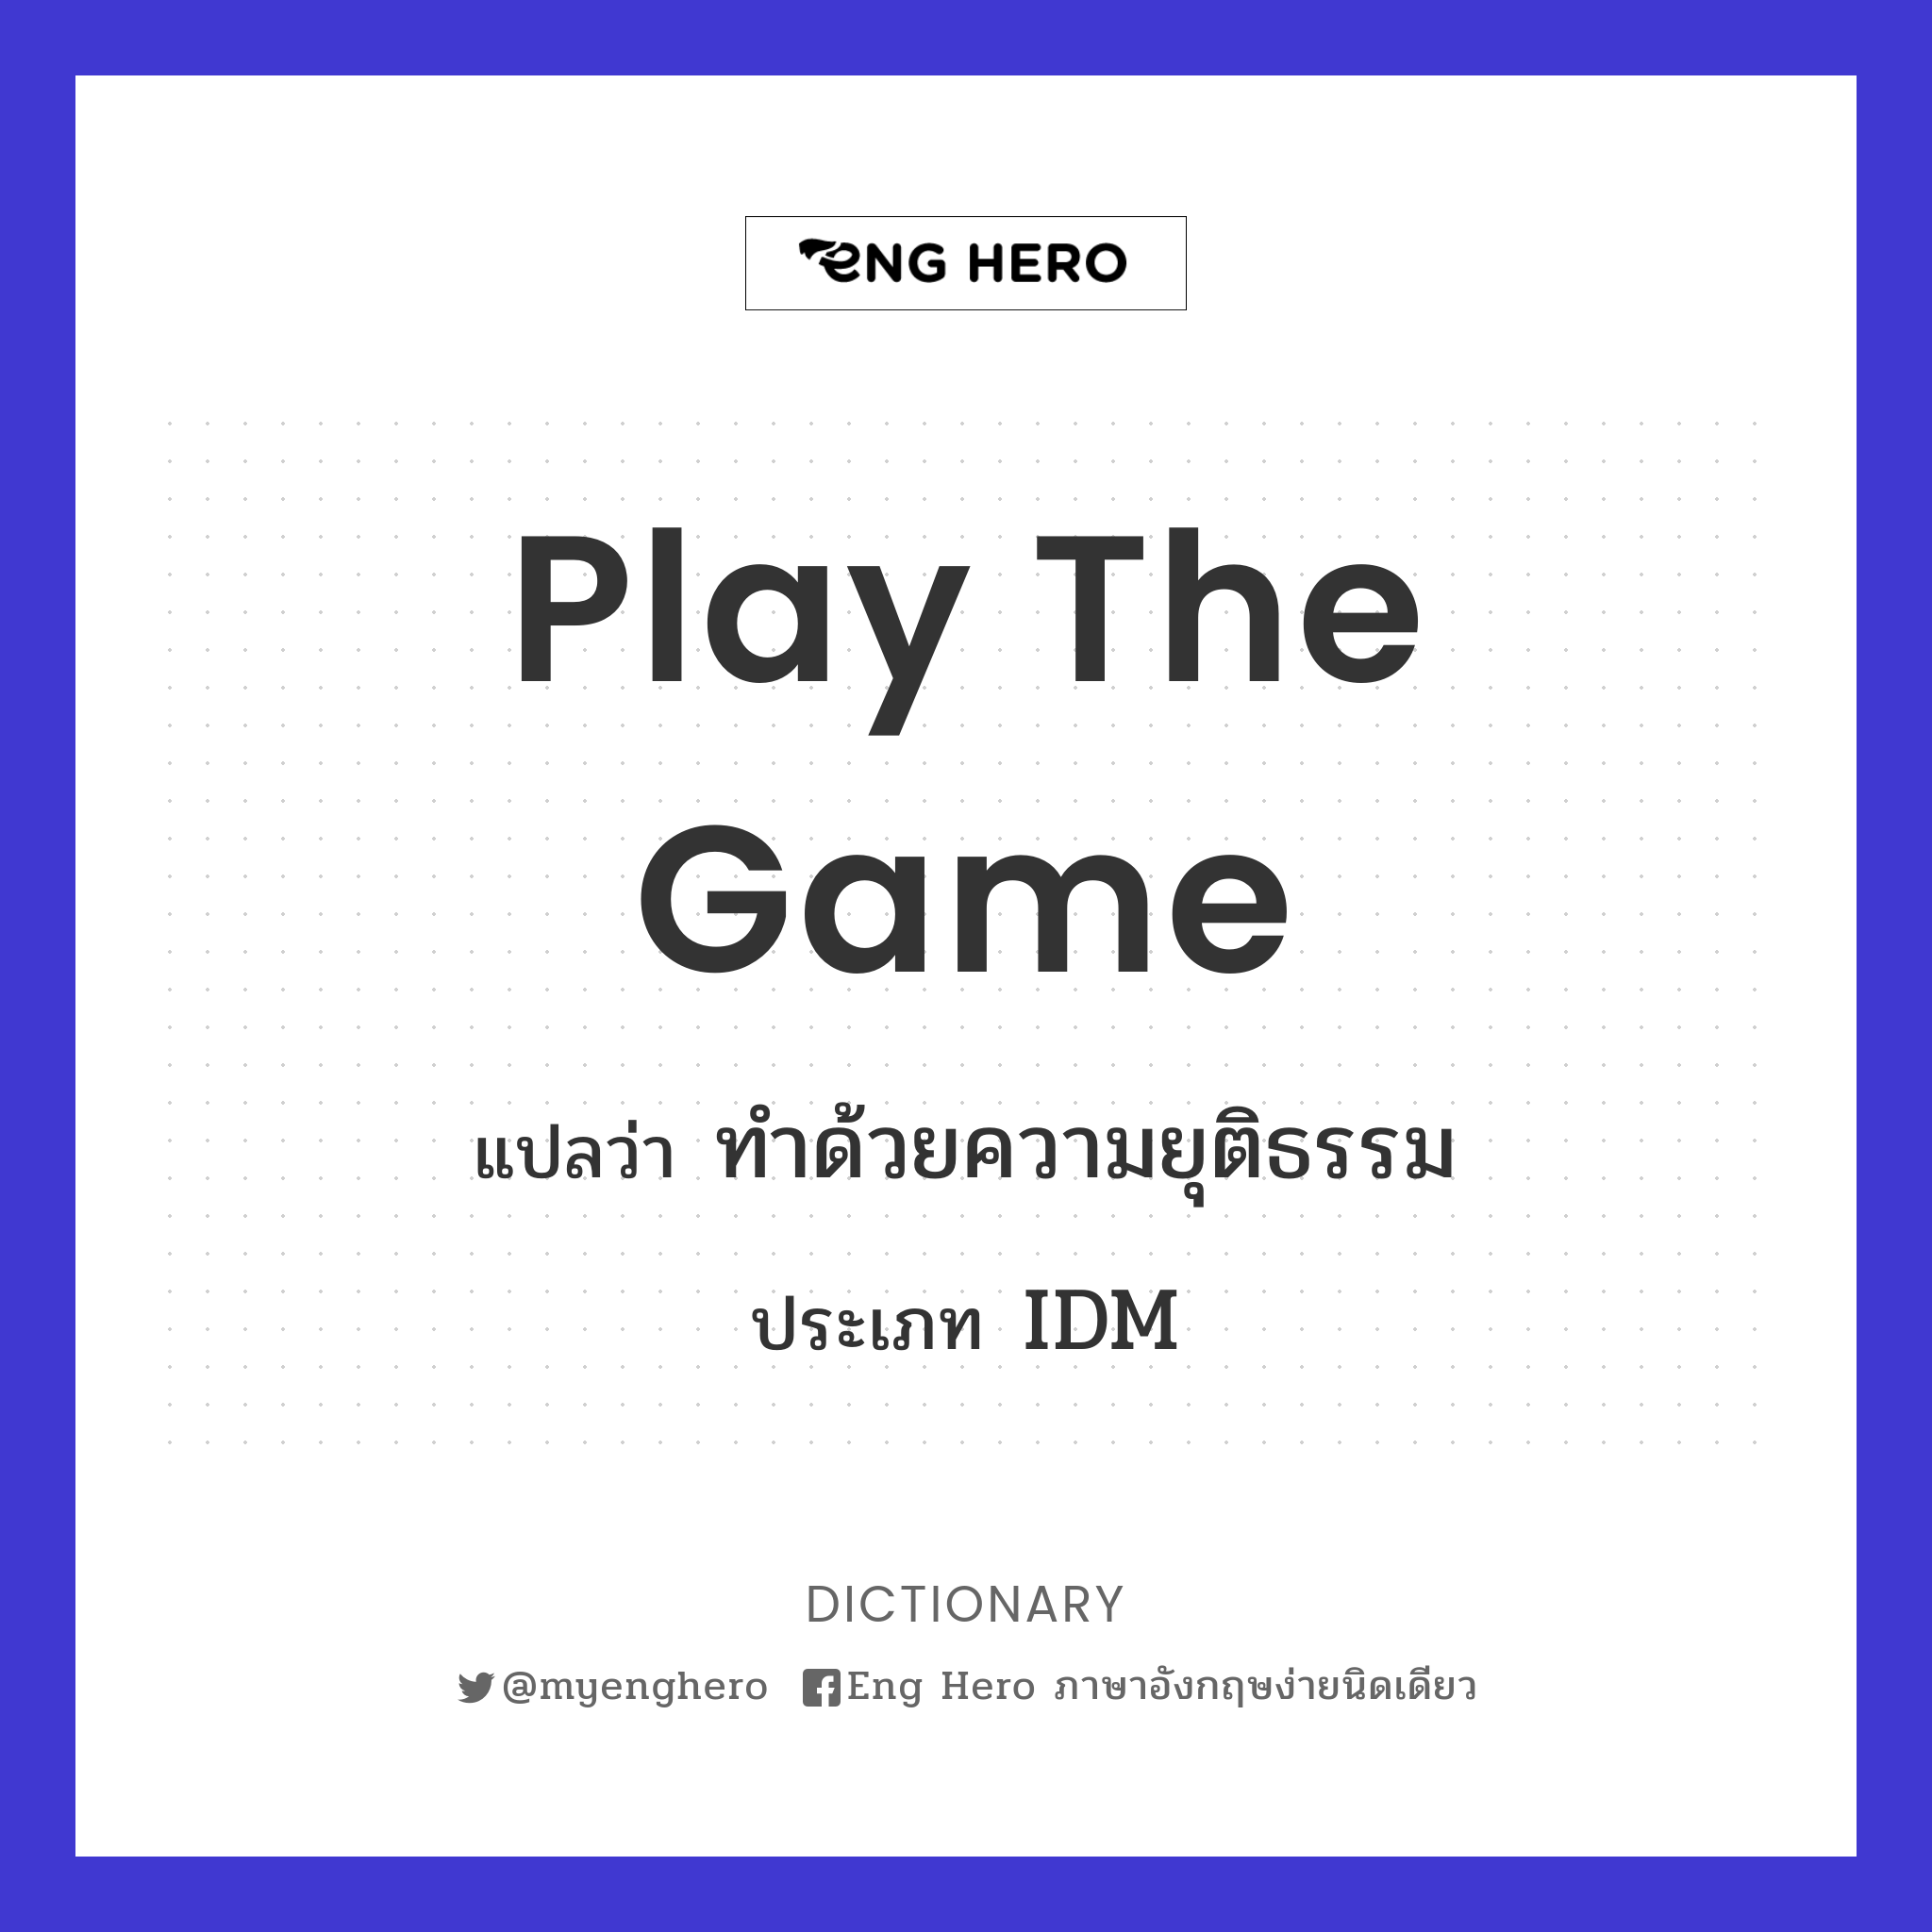 play the game